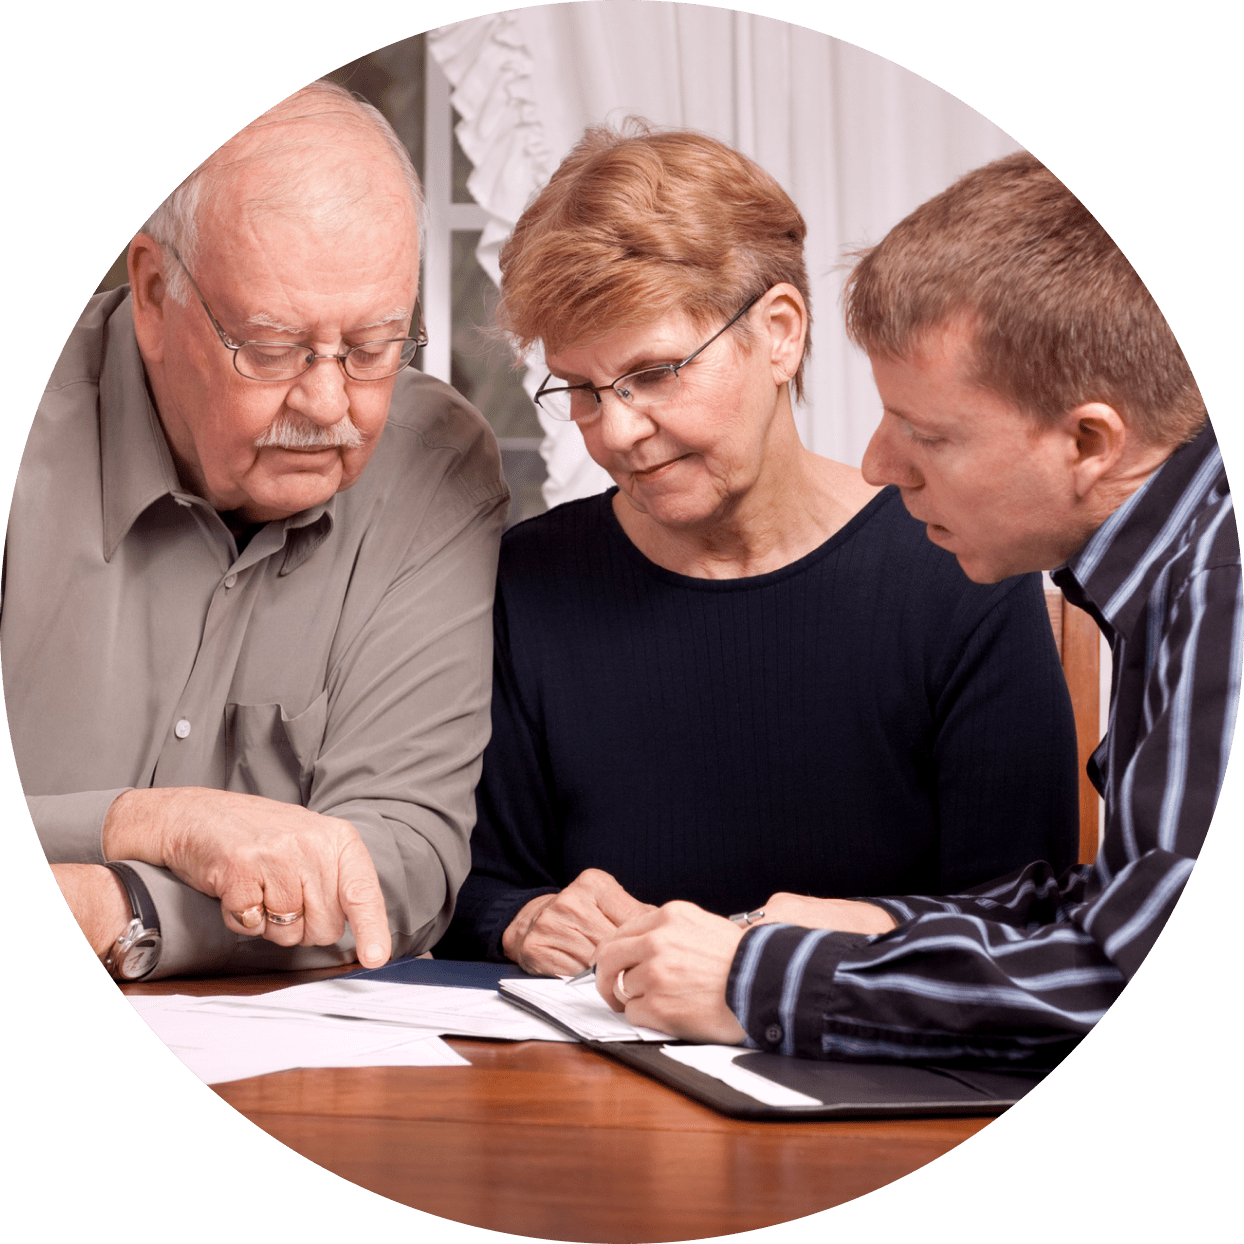 Finding Answers - Estate Planning